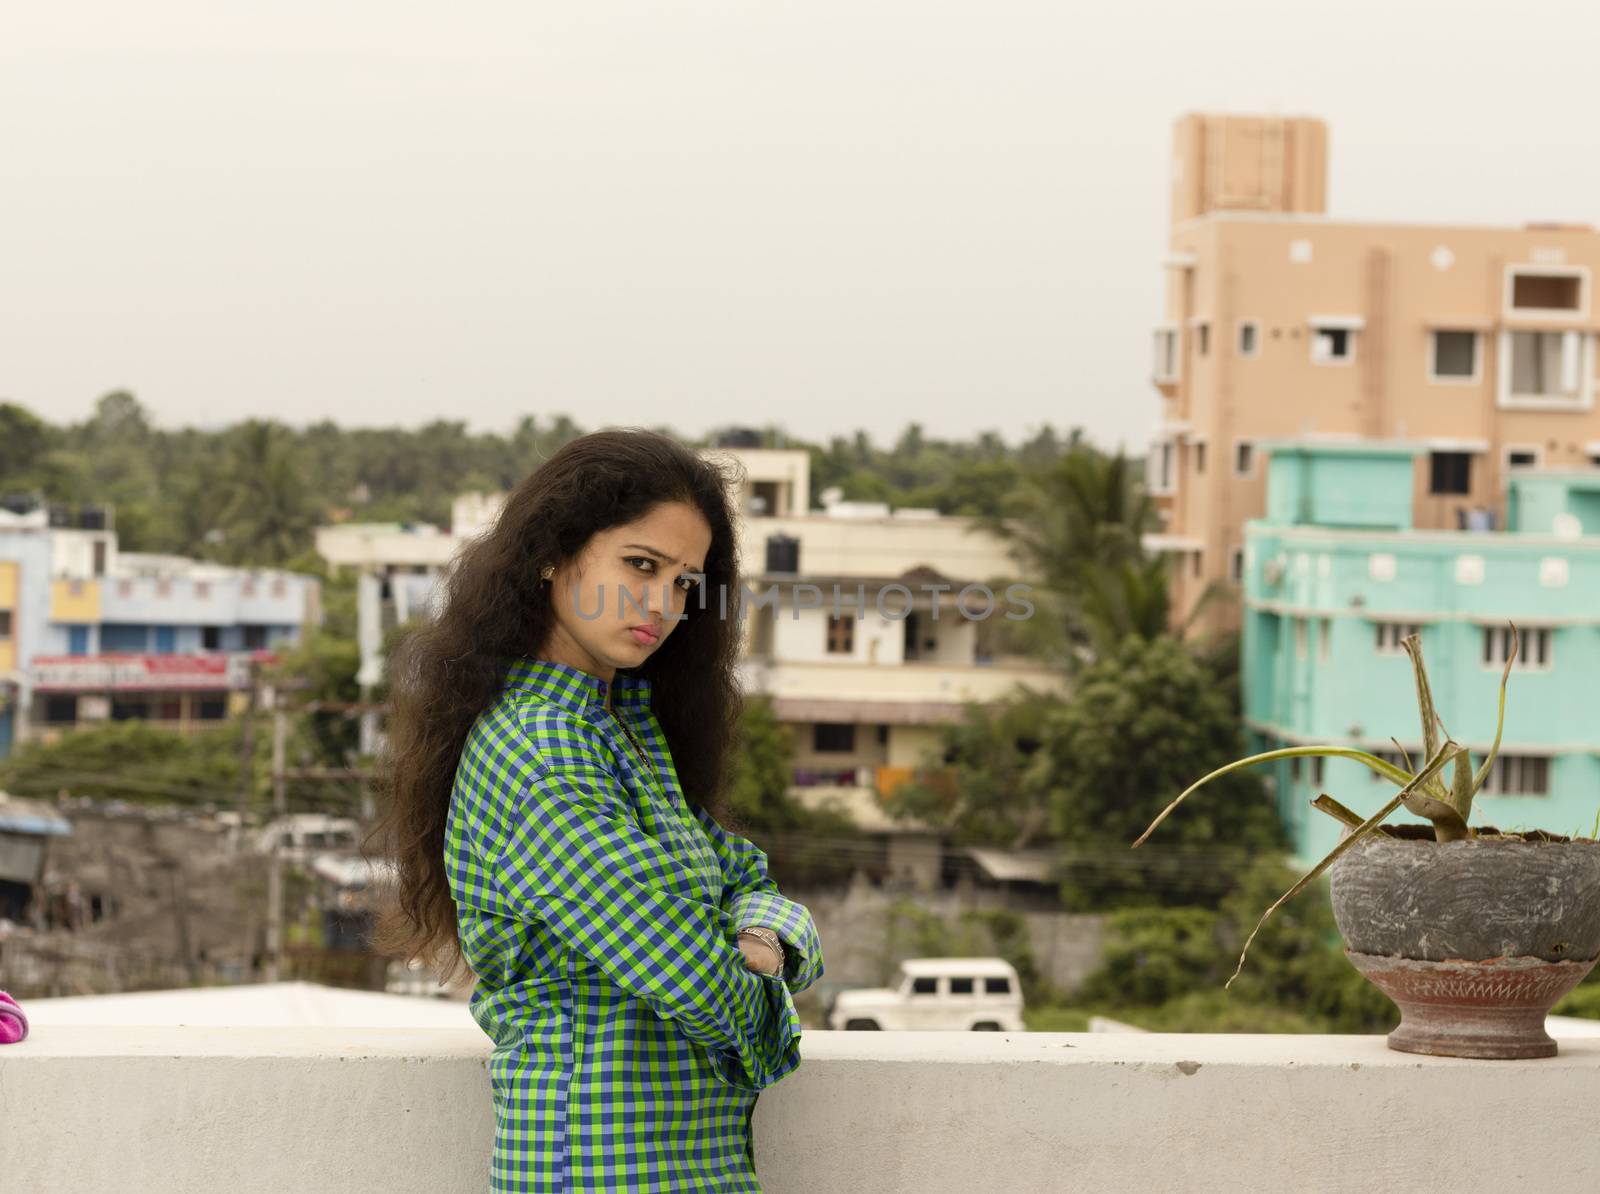 A young Hindu Indian woman standing in an open environment above the roof of the house and happily photographed beautiful by 9500102400